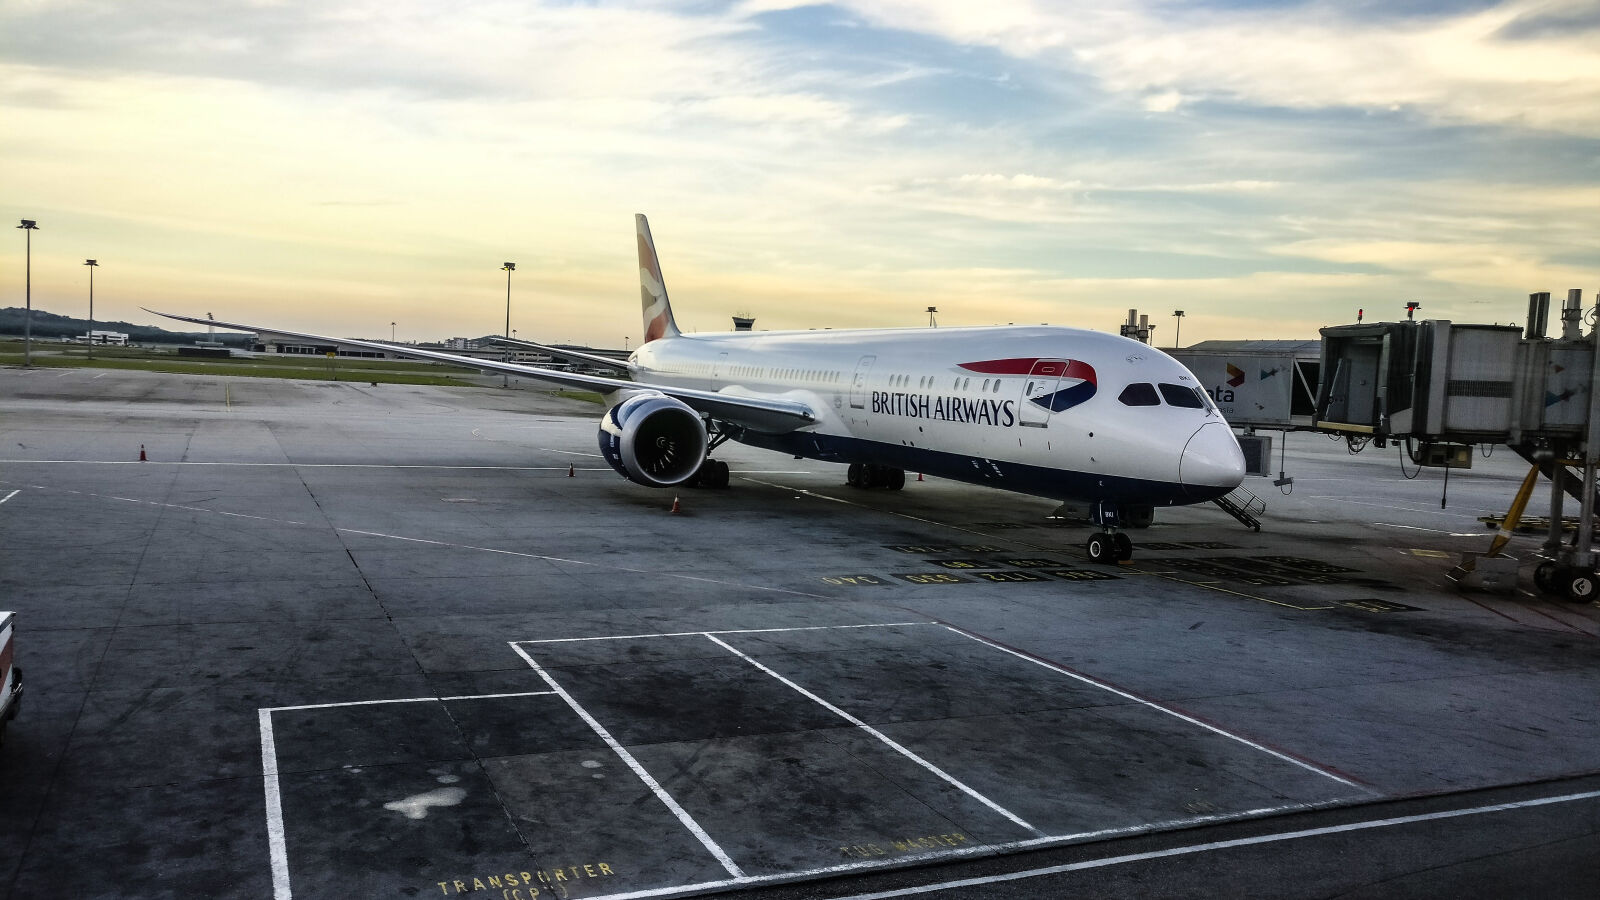 OnePlus A3010 sample photo. 787, aviation, blue, boeing photography